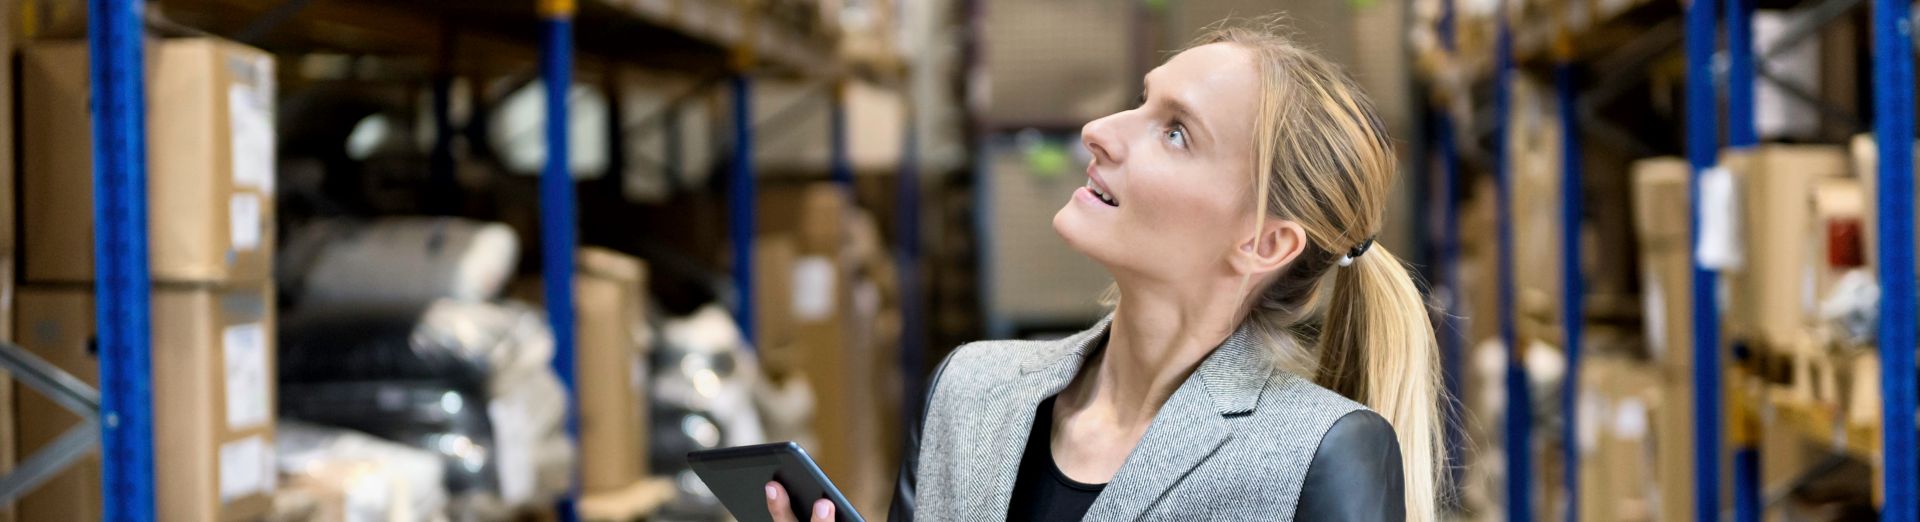 Woman checking inventory with tablet in warehouse